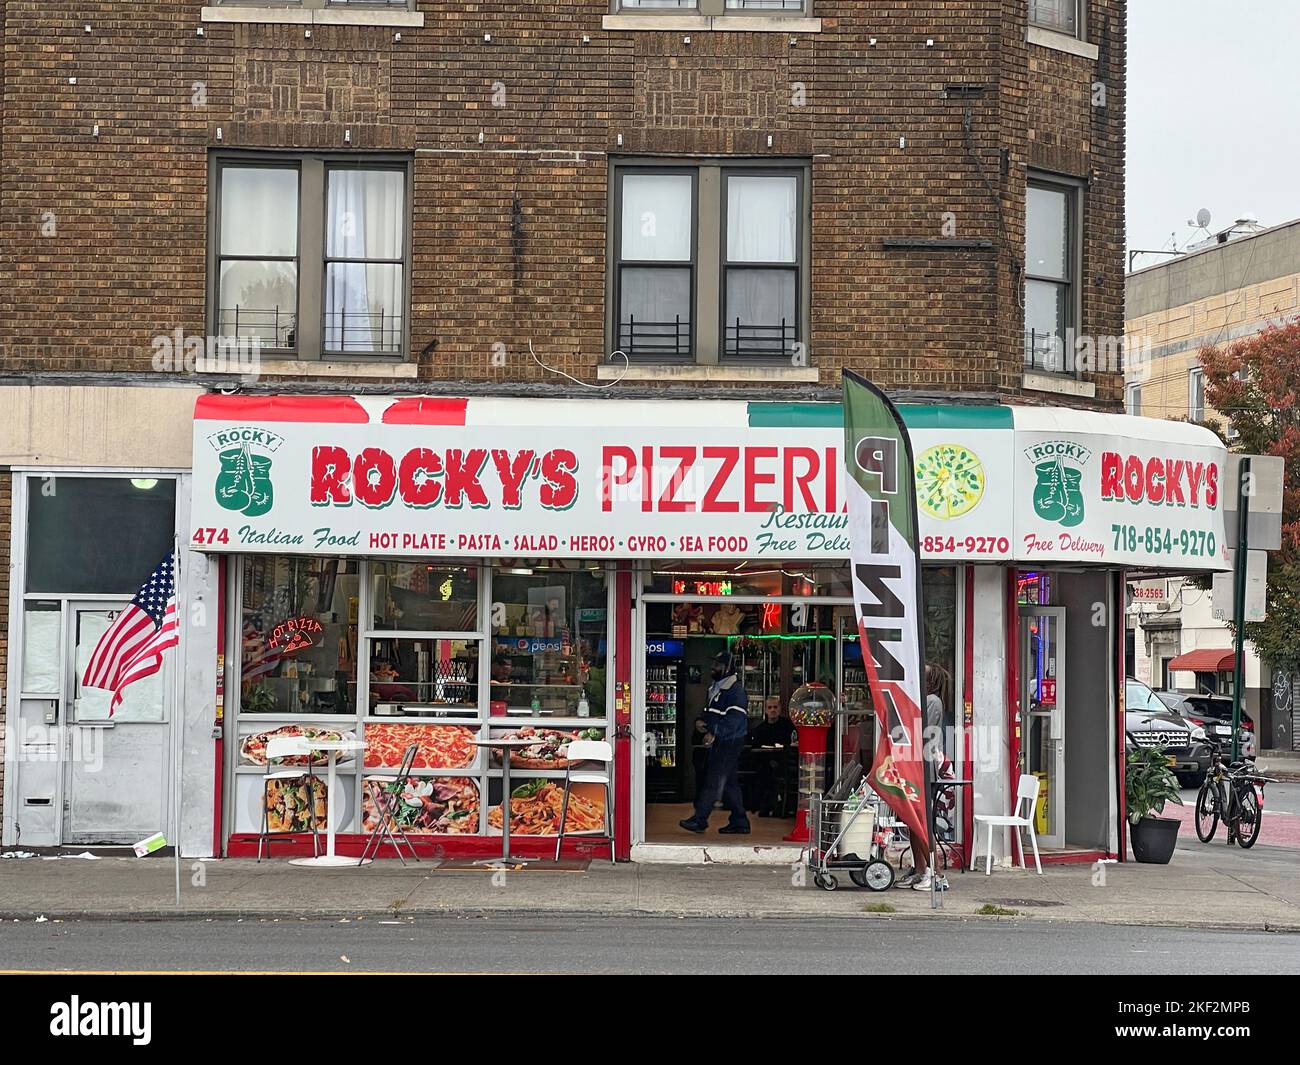 The popular Rocky's Pizzeria at the corner of Church and Coney Island Avenues in the Kensington neighborhood of Brooklyn, New York. Stock Photo